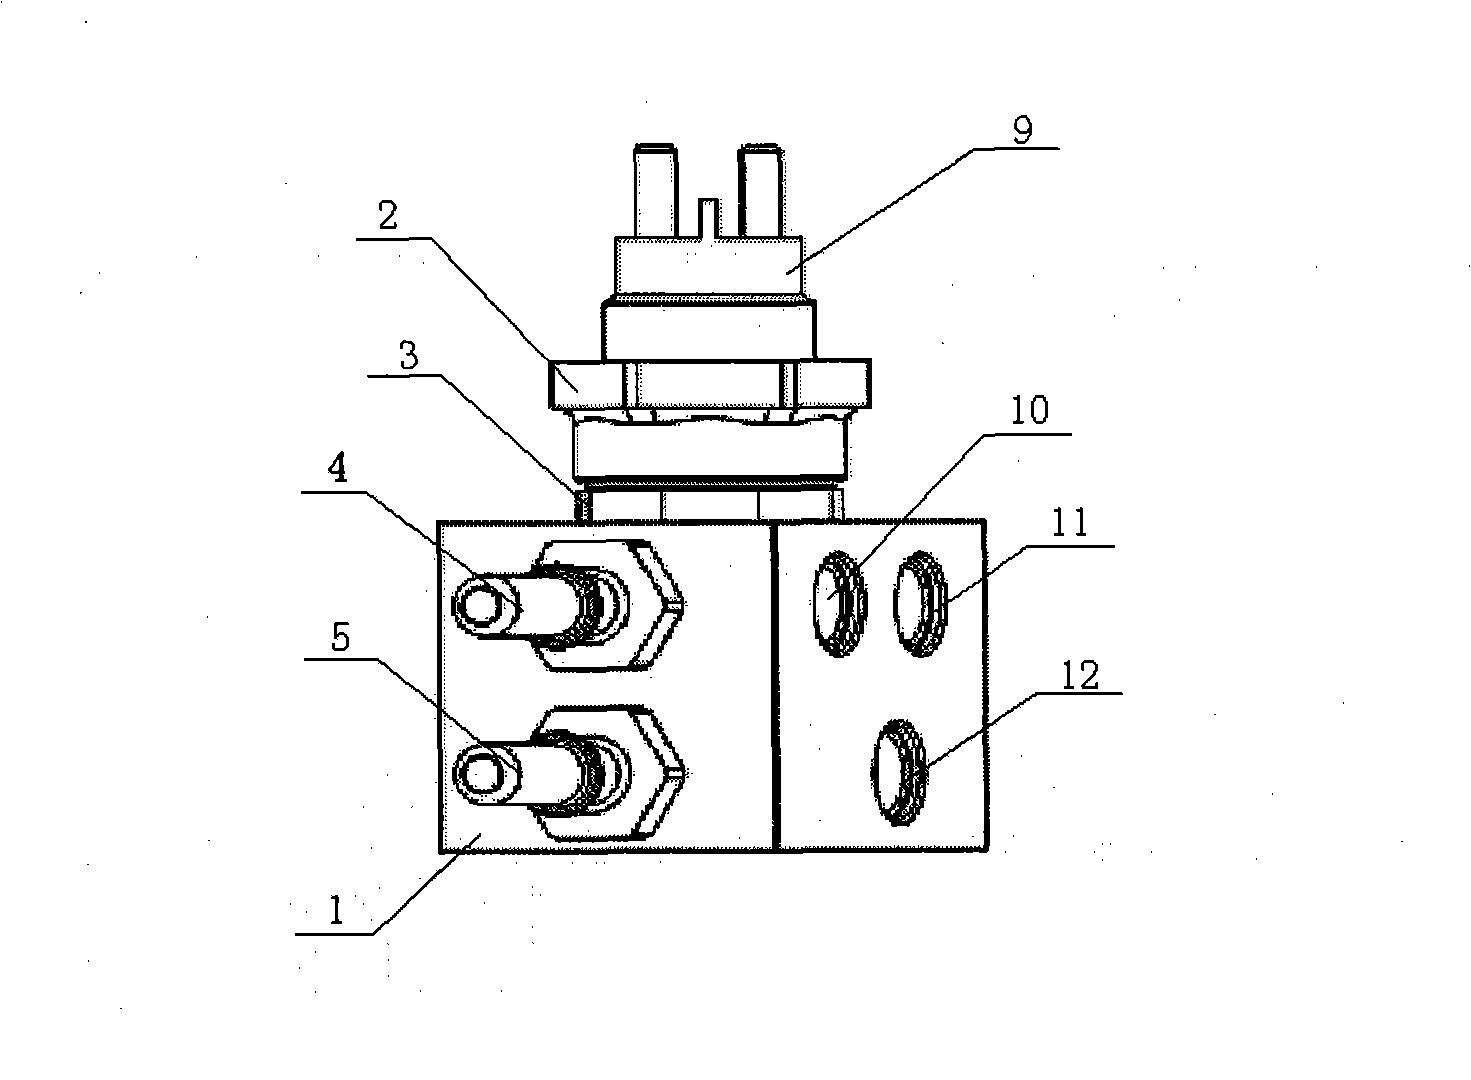 Air mixing and metering system for processing vehicle exhaust